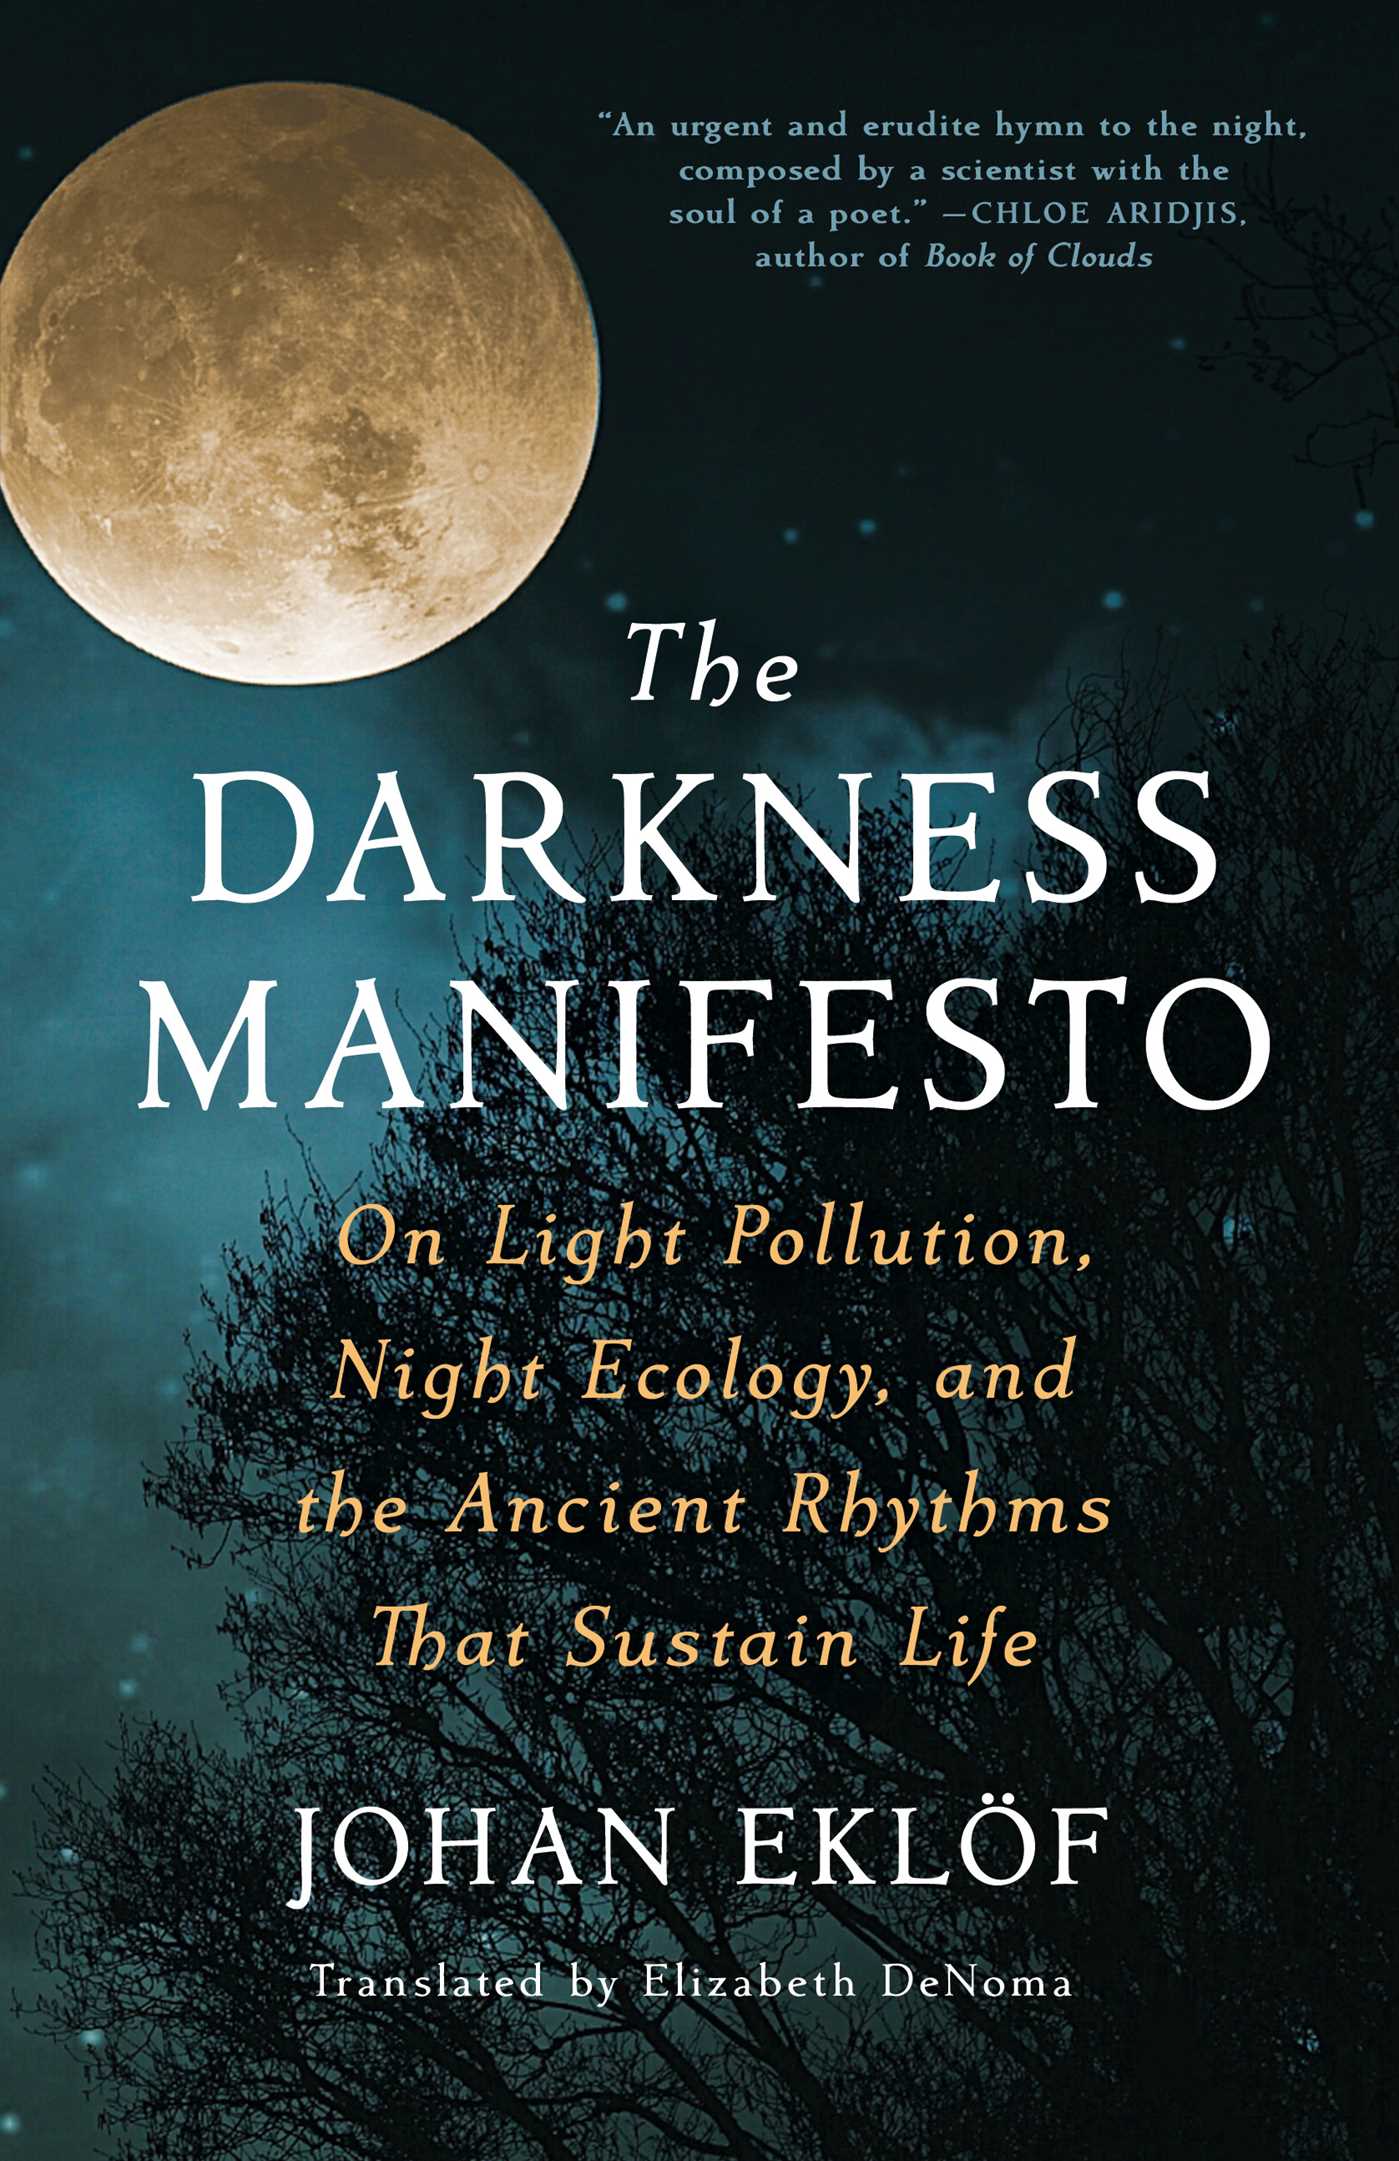 Image for "The Darkness Manifesto"